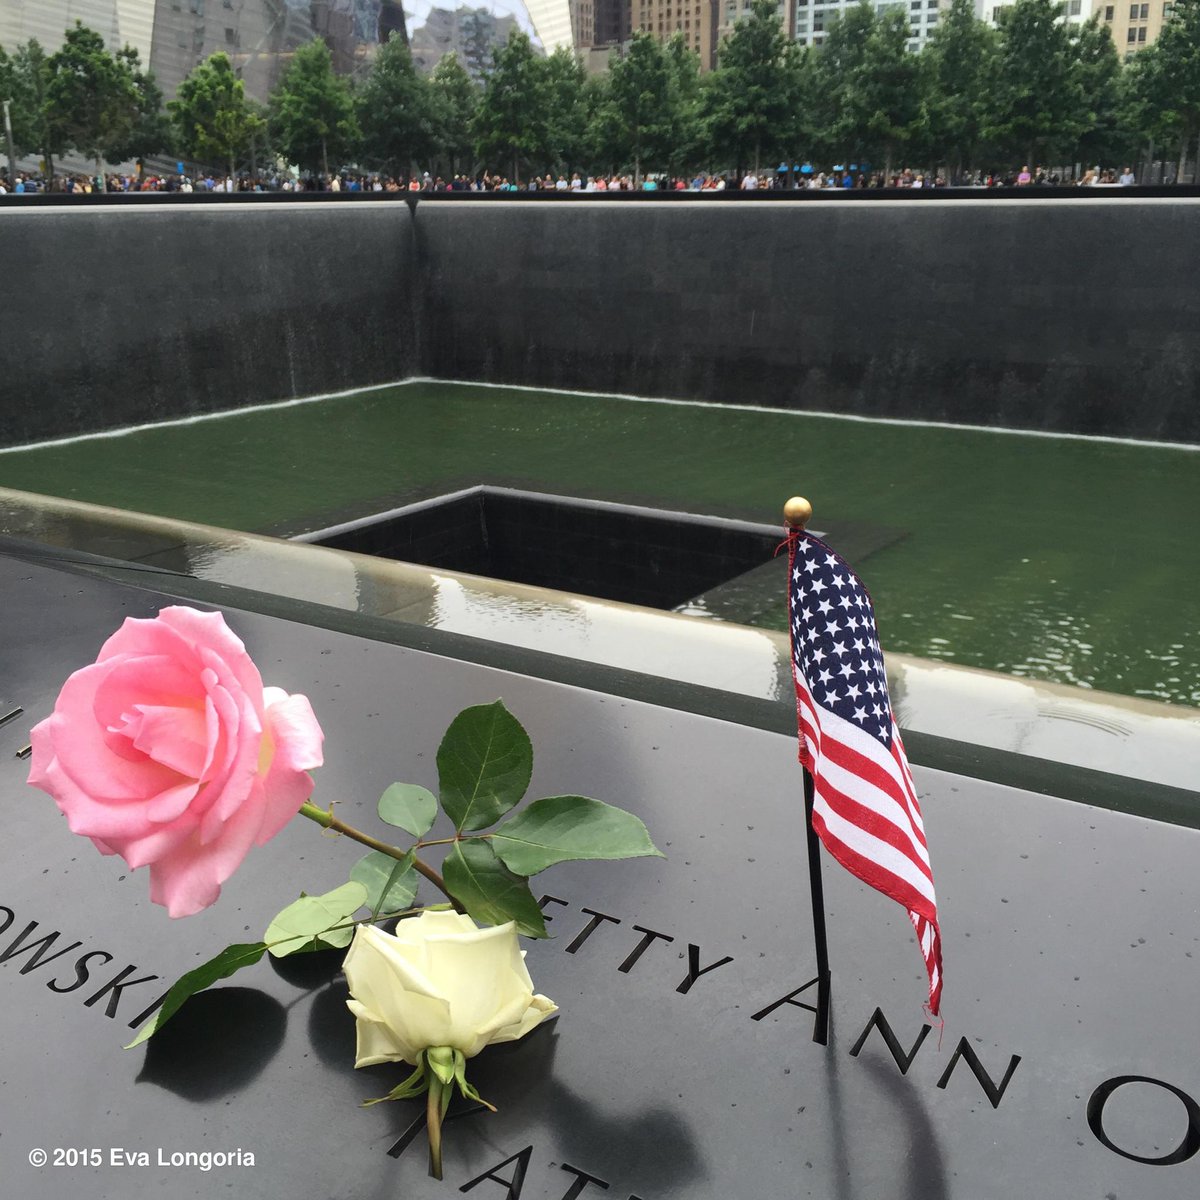 What a beautiful memorial to those we still remember today #OneWorld #NewYork #USA http://t.co/Q97BfXshZx